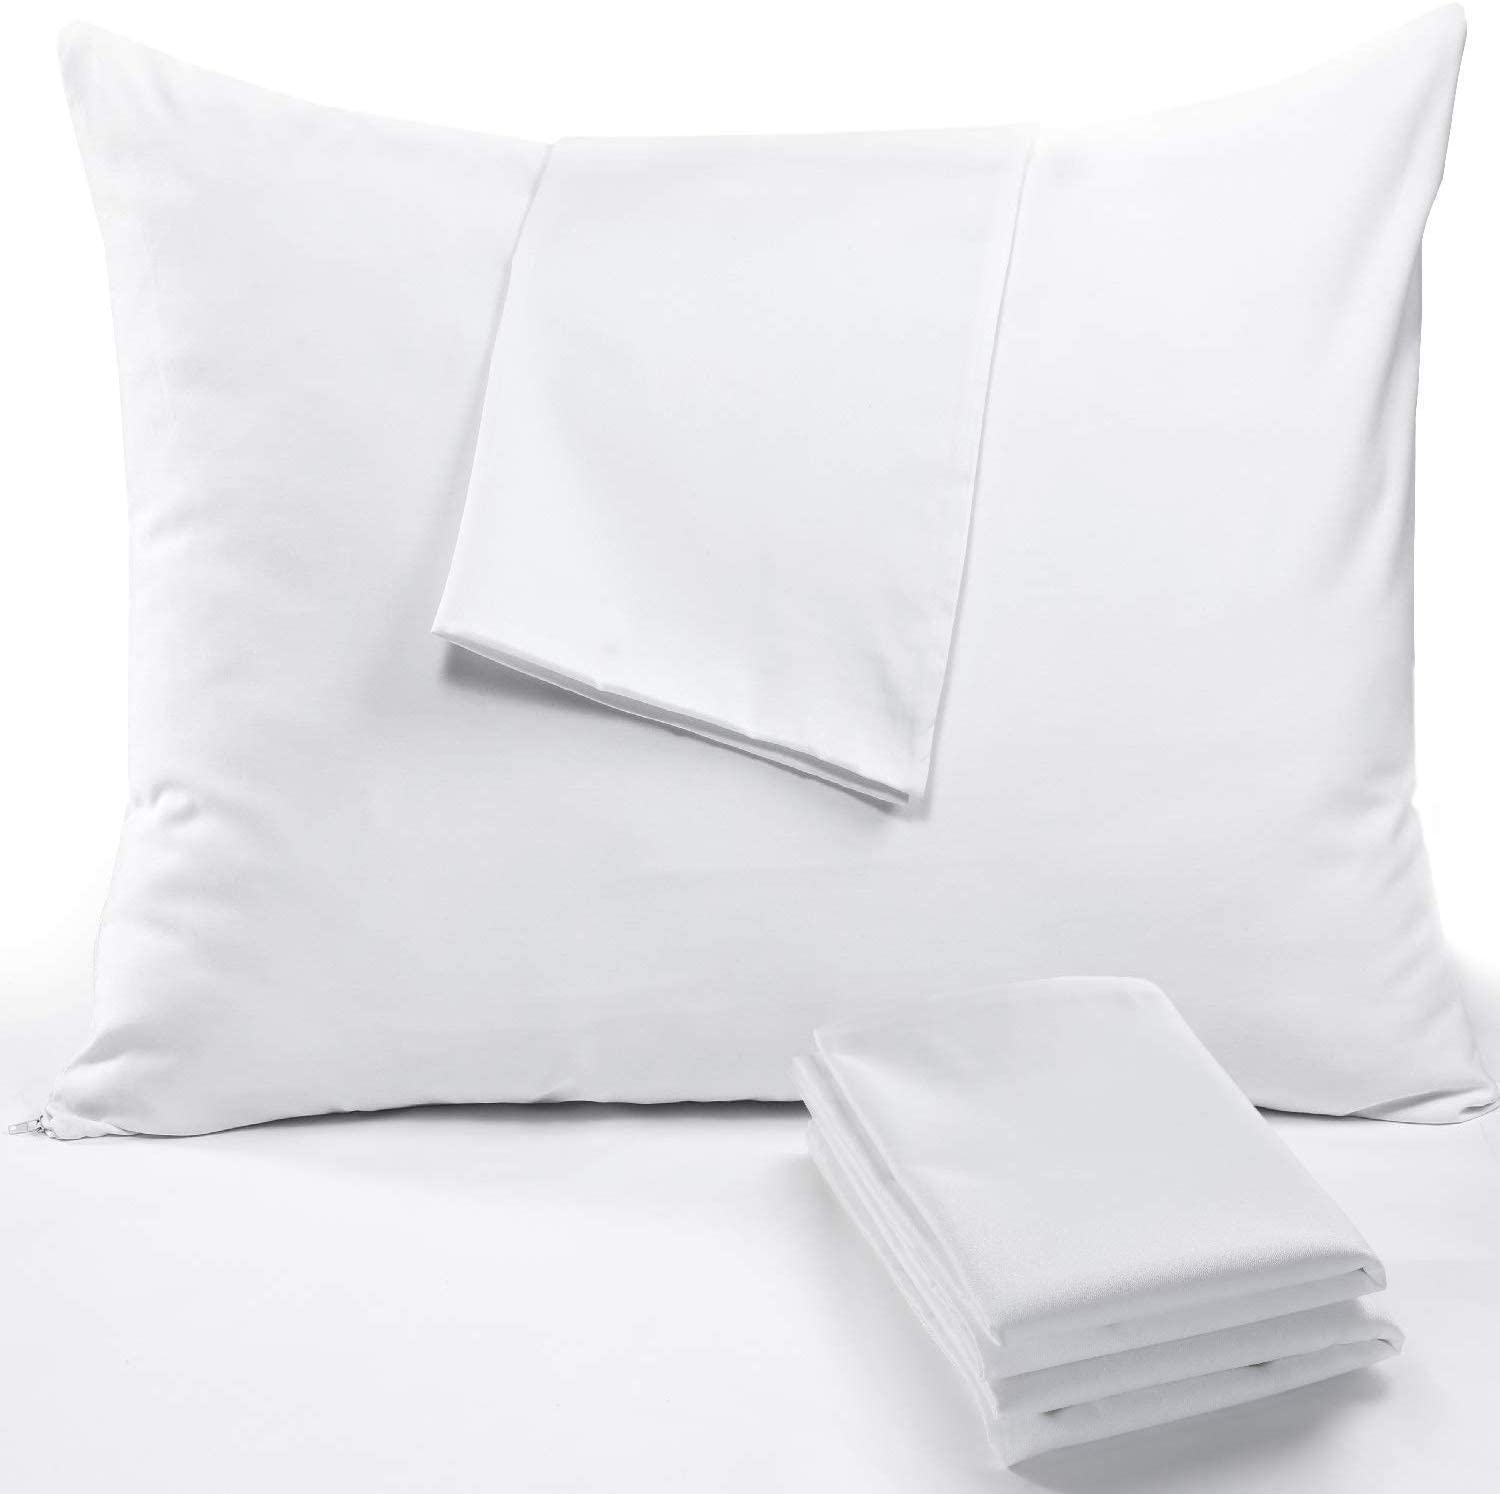 4pack of soft and silky cotton sateen zippered pillow covers to keep your pillow clean and protect from dust-mites and unwanted stains